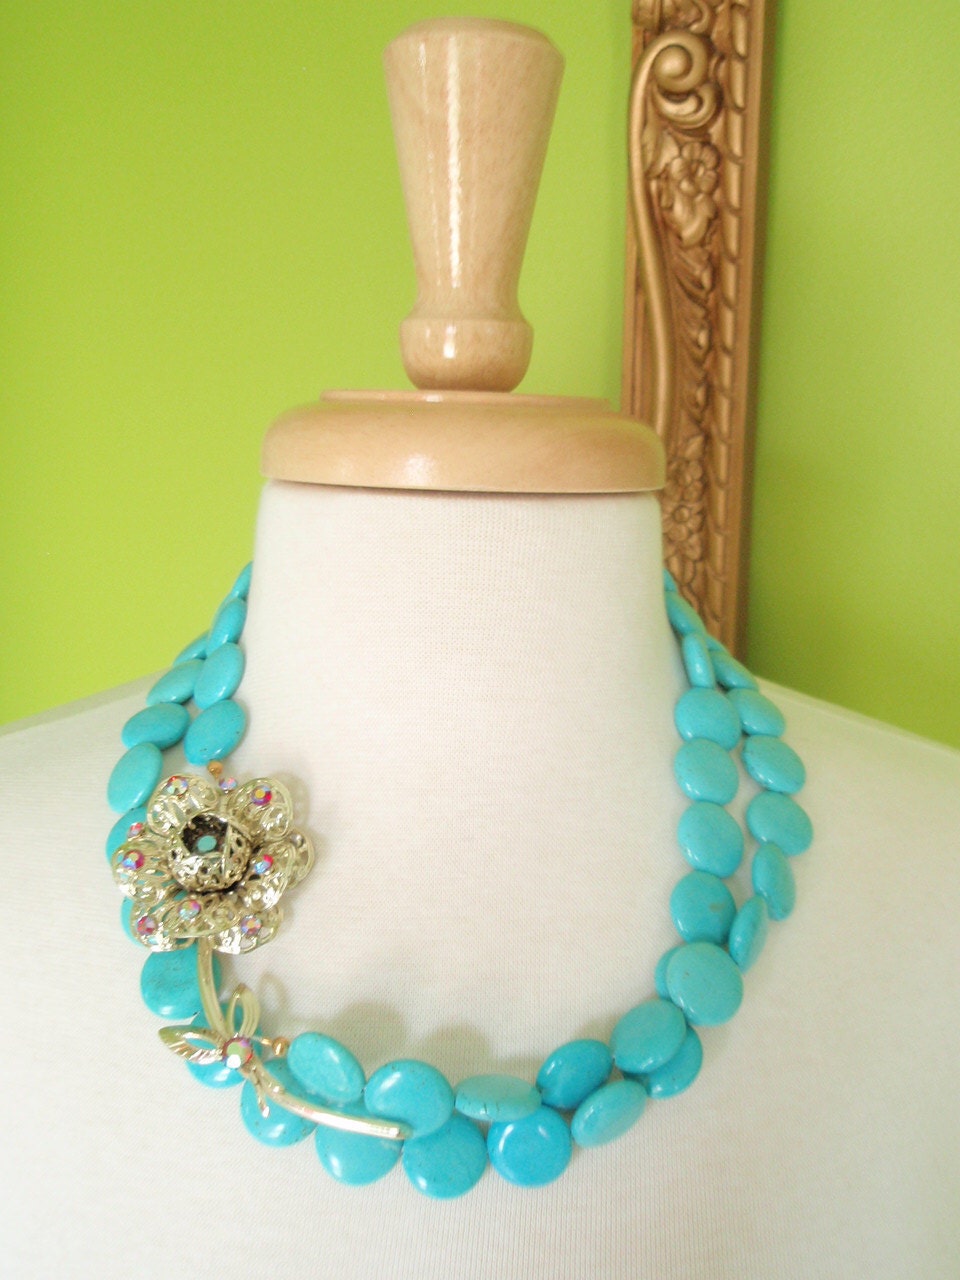 ROSE - Double Strand Turquoise Necklace with Gold Vintage Brooch